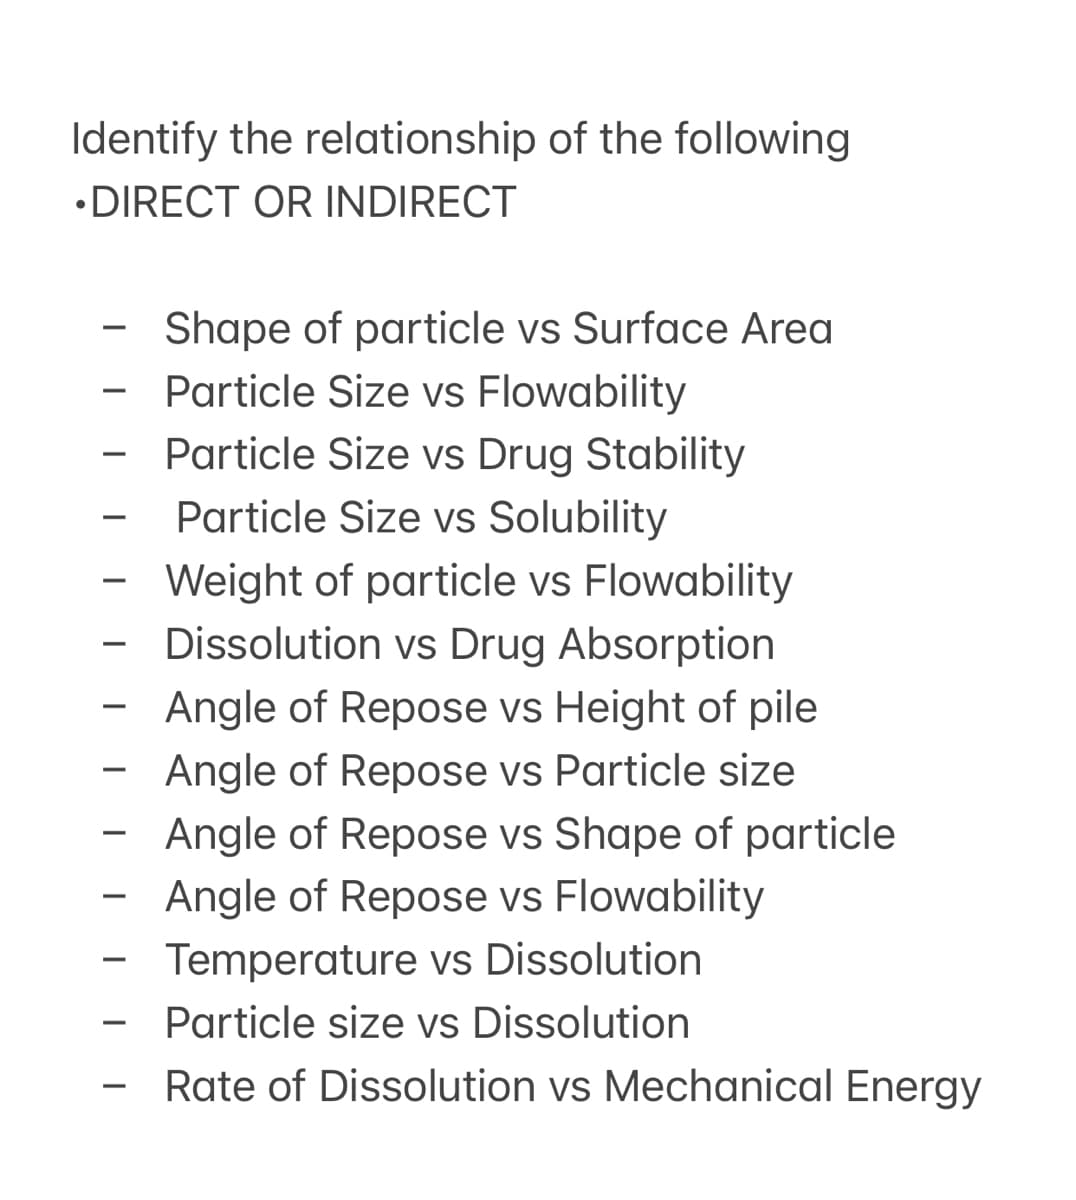 Identify the relationship of the following
•DIRECT OR INDIRECT
Shape of particle vs Surface Area
Particle Size vs Flowability
Particle Size vs Drug Stability
Particle Size vs Solubility
Weight of particle vs Flowability
Dissolution vs Drug Absorption
Angle of Repose vs Height of pile
-
Angle of Repose vs Particle size
-
Angle of Repose vs Shape of particle
-
Angle of Repose vs Flowability
Temperature vs Dissolution
Particle size vs Dissolution
Rate of Dissolution vs Mechanical Energy
